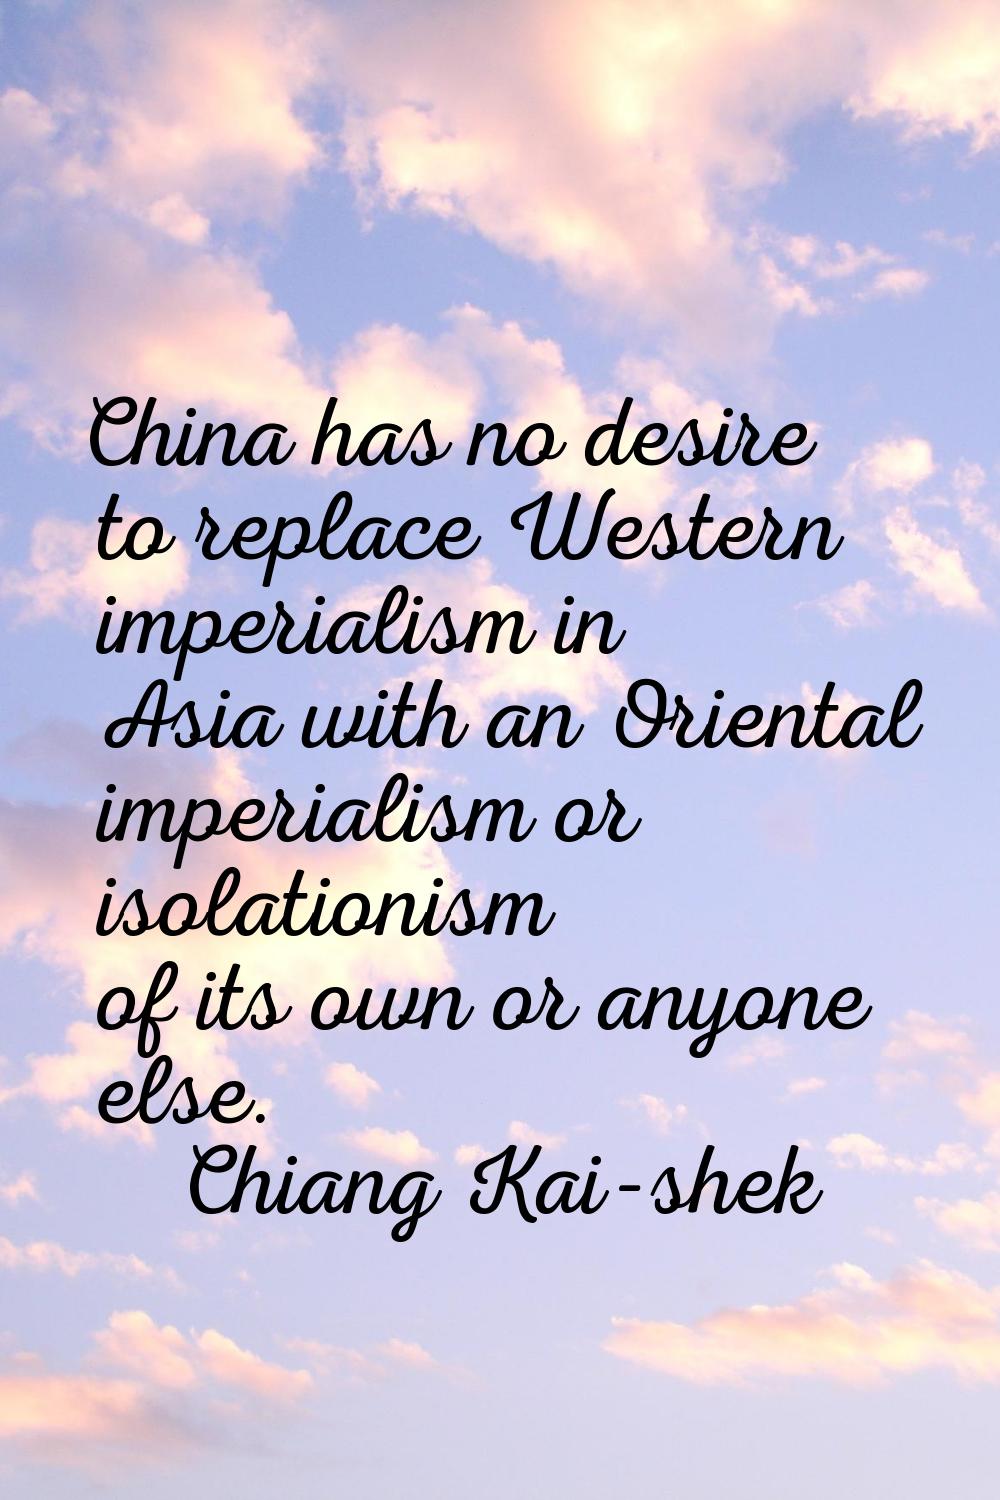 China has no desire to replace Western imperialism in Asia with an Oriental imperialism or isolatio